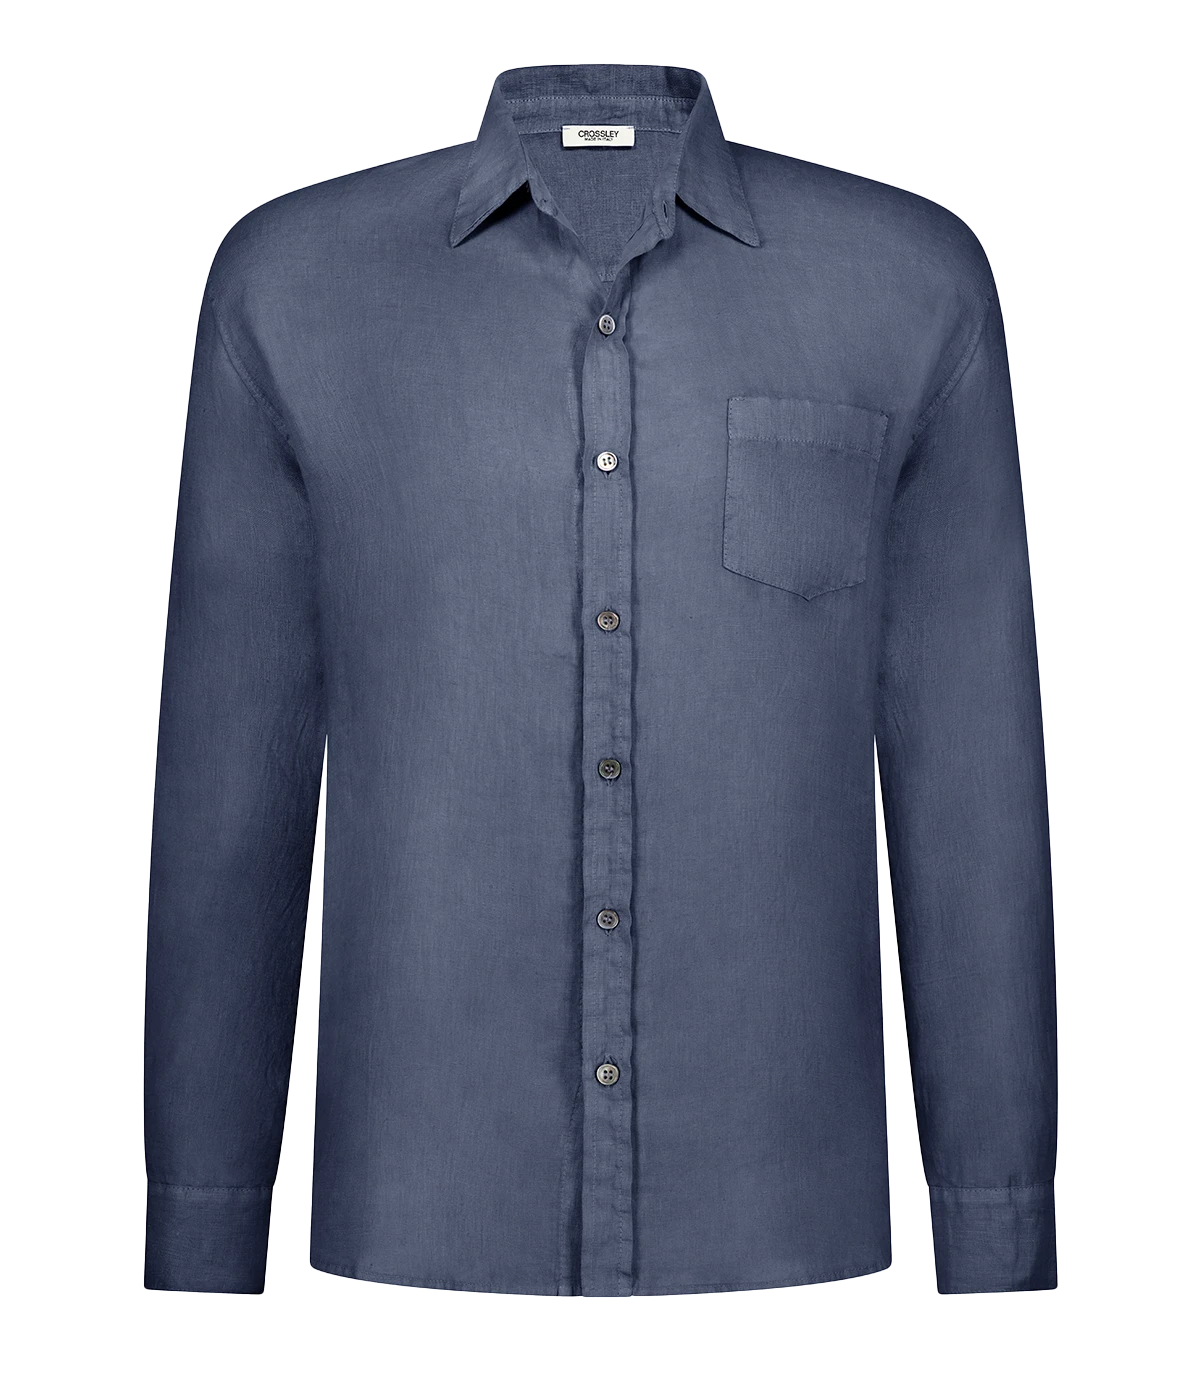 A summer staple long sleeve 100% linen shirt in a washed blue, button up & collar detailing featuring a front pocket. Made in Italy, 100% linen, throw on and go. 